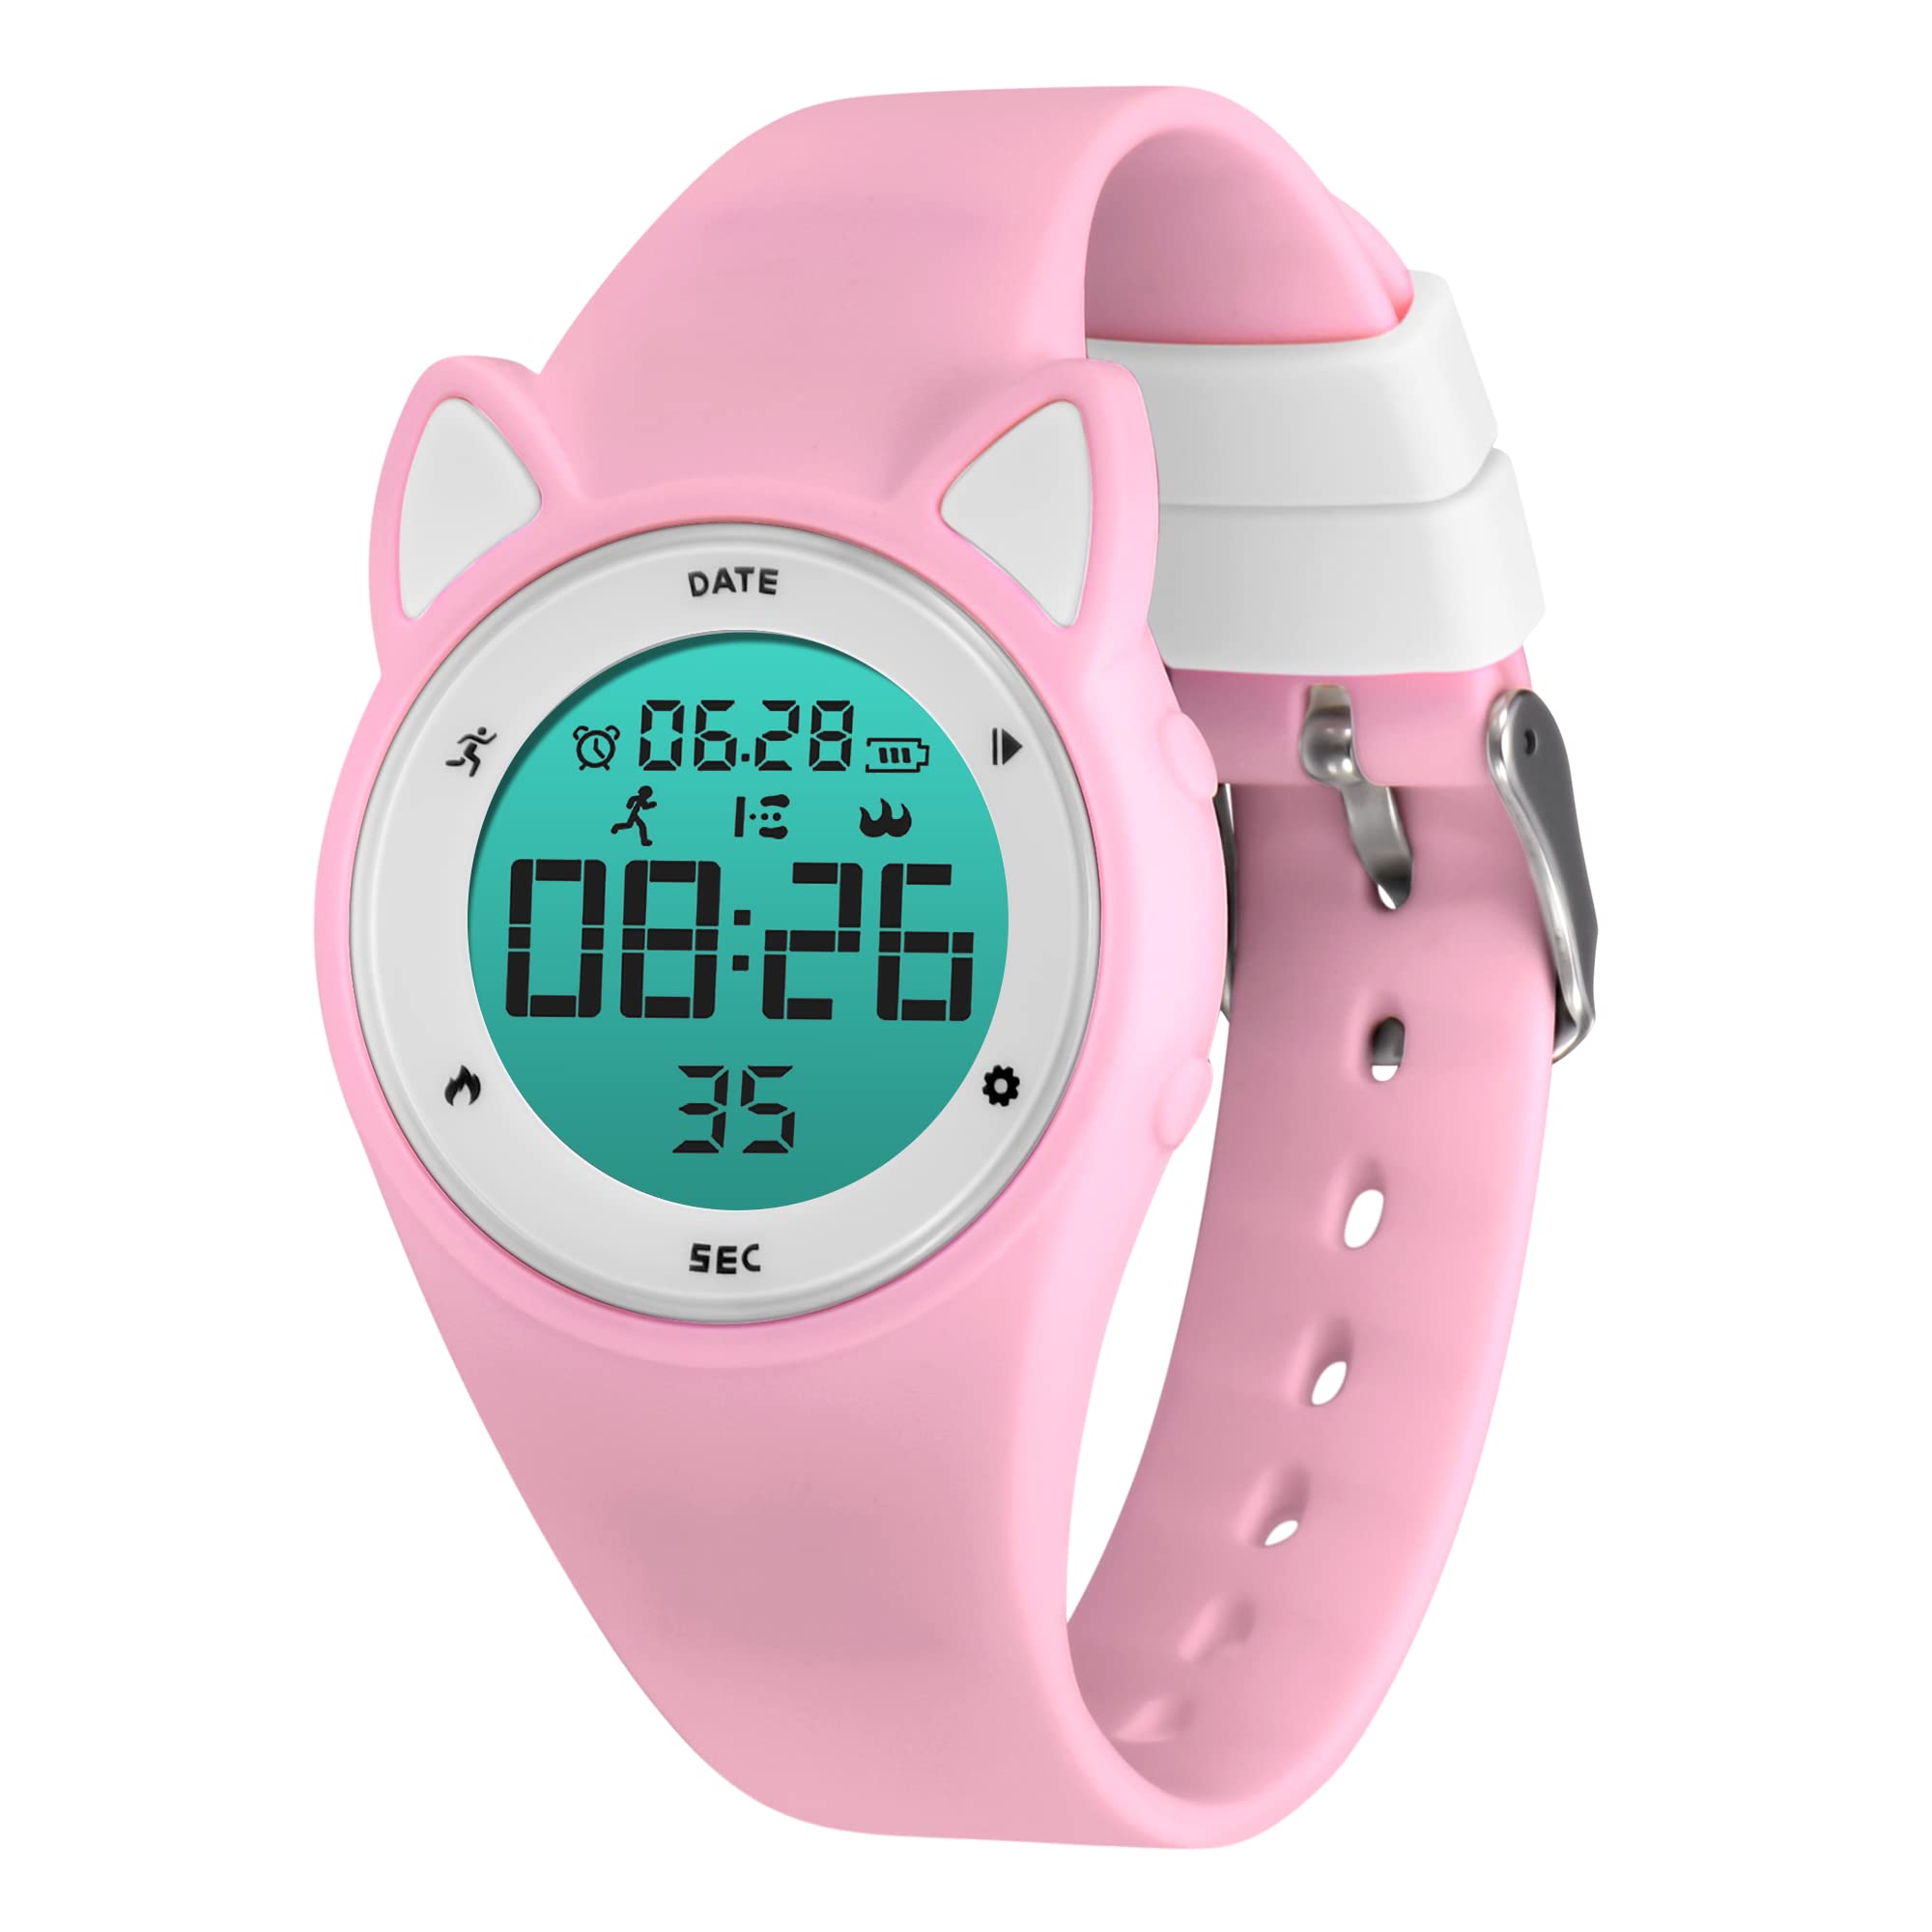 NN BEN NEVIS Digital Watch for Boys Girls with Fitness Tracker Alarm Clock Stopwatch No App and Waterproof for Kids Ages 5